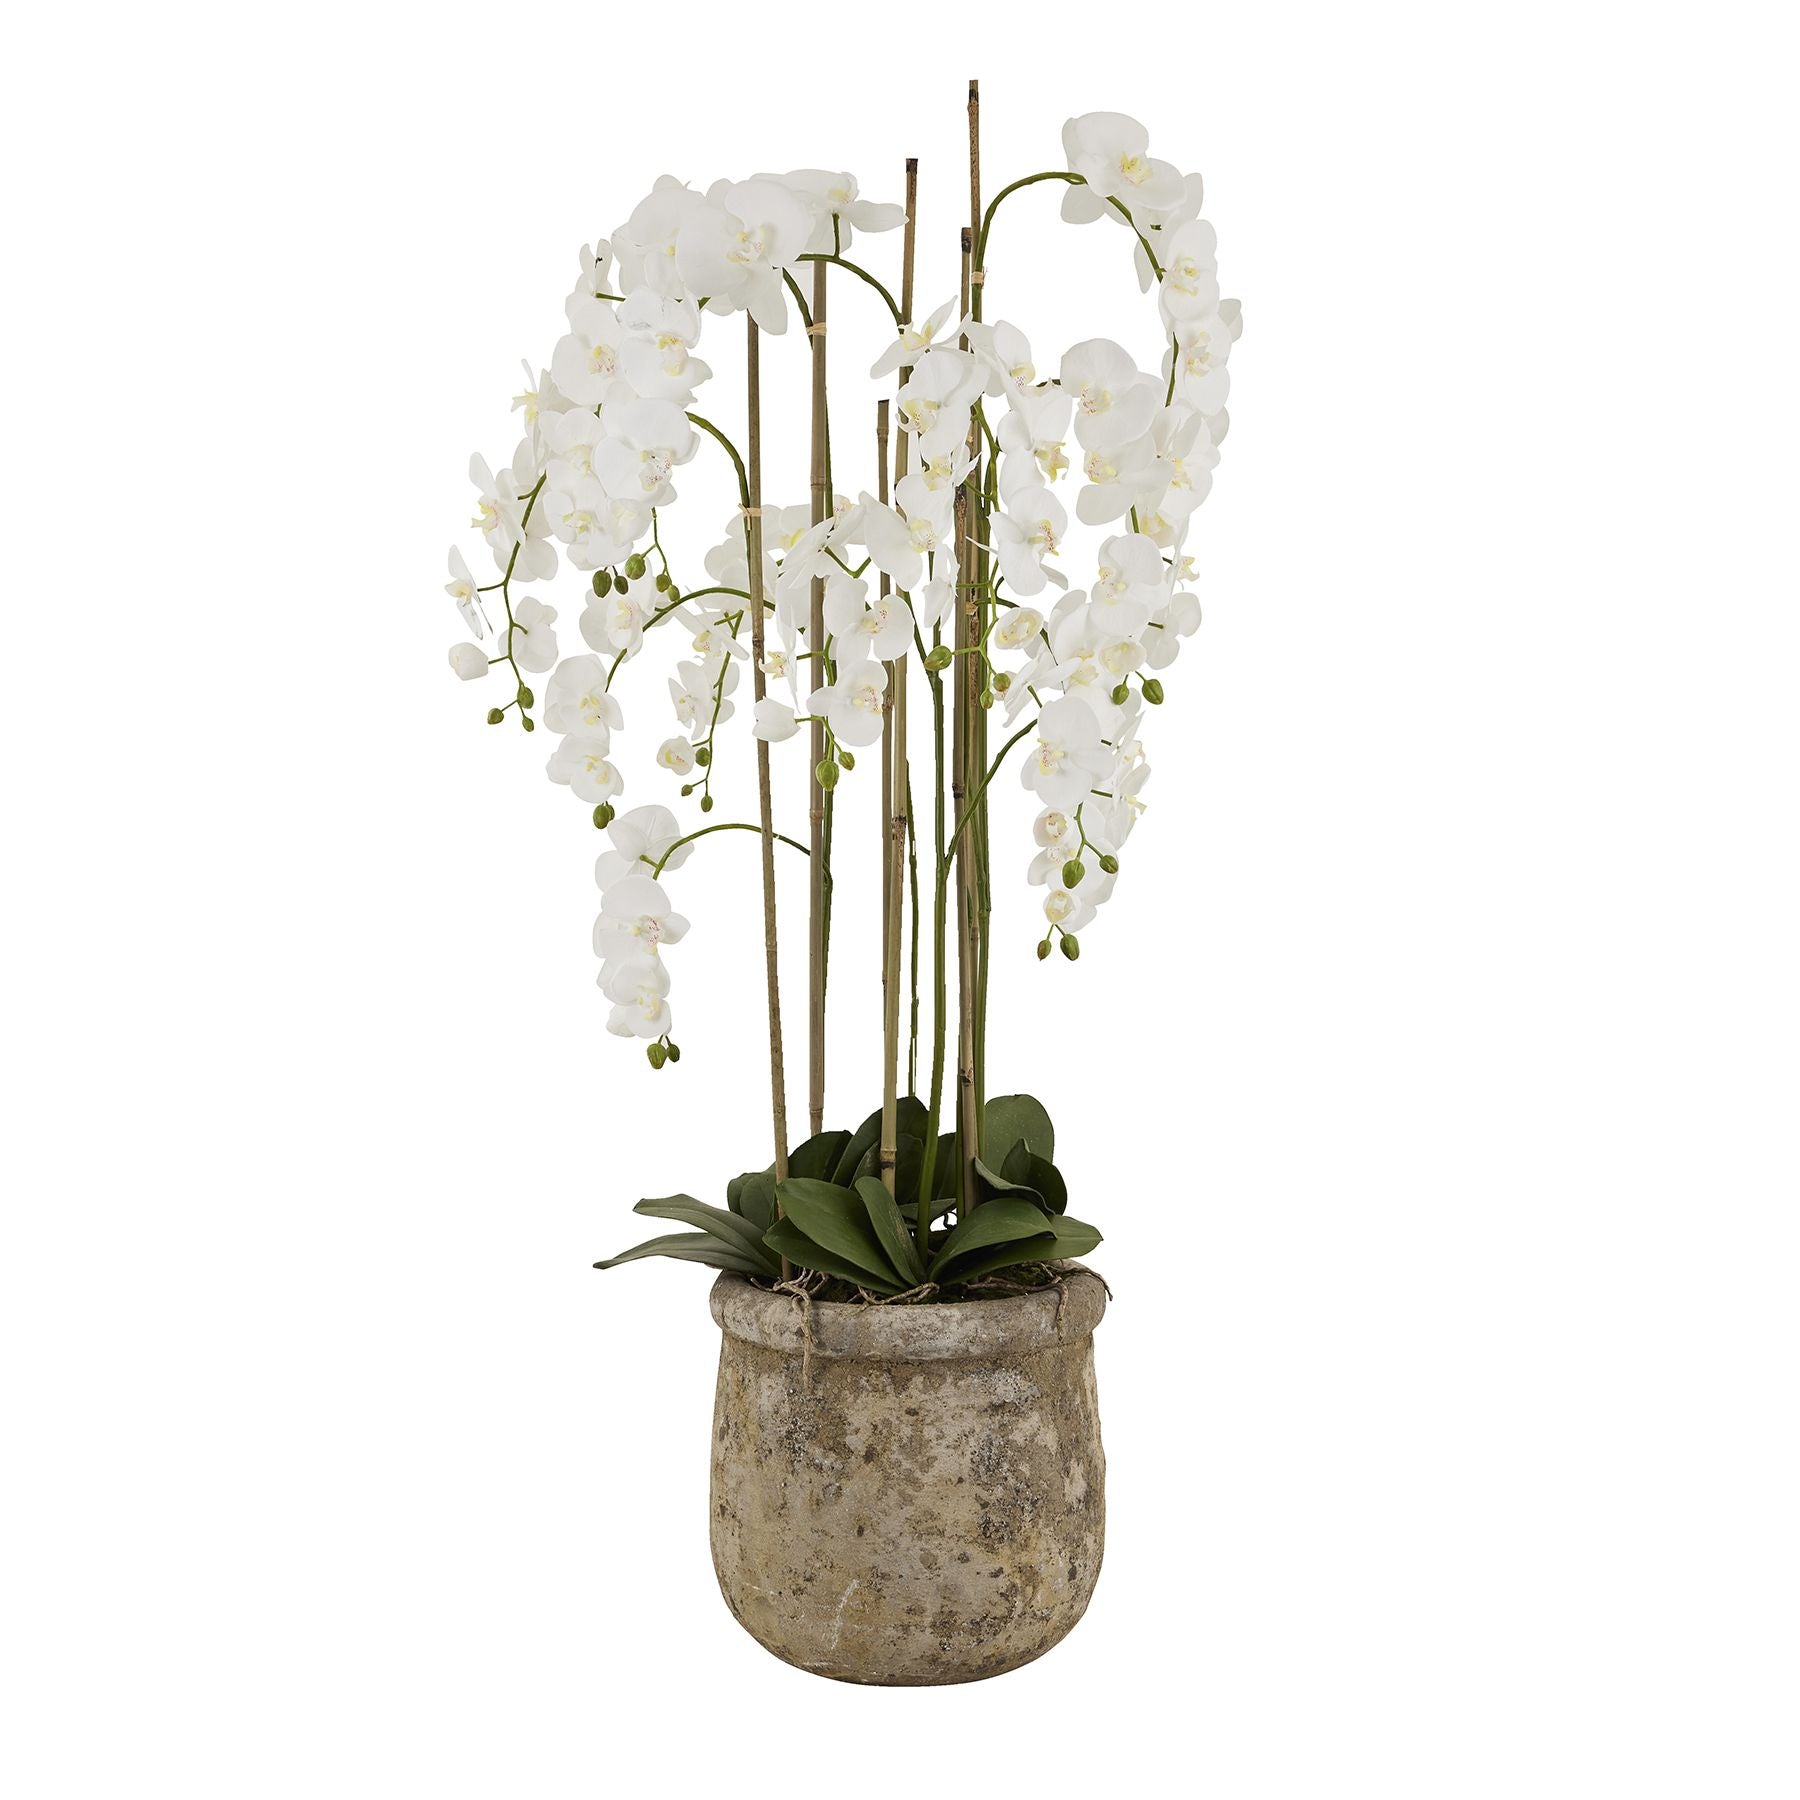 View Large White Orchid In Antique Stone Pot information